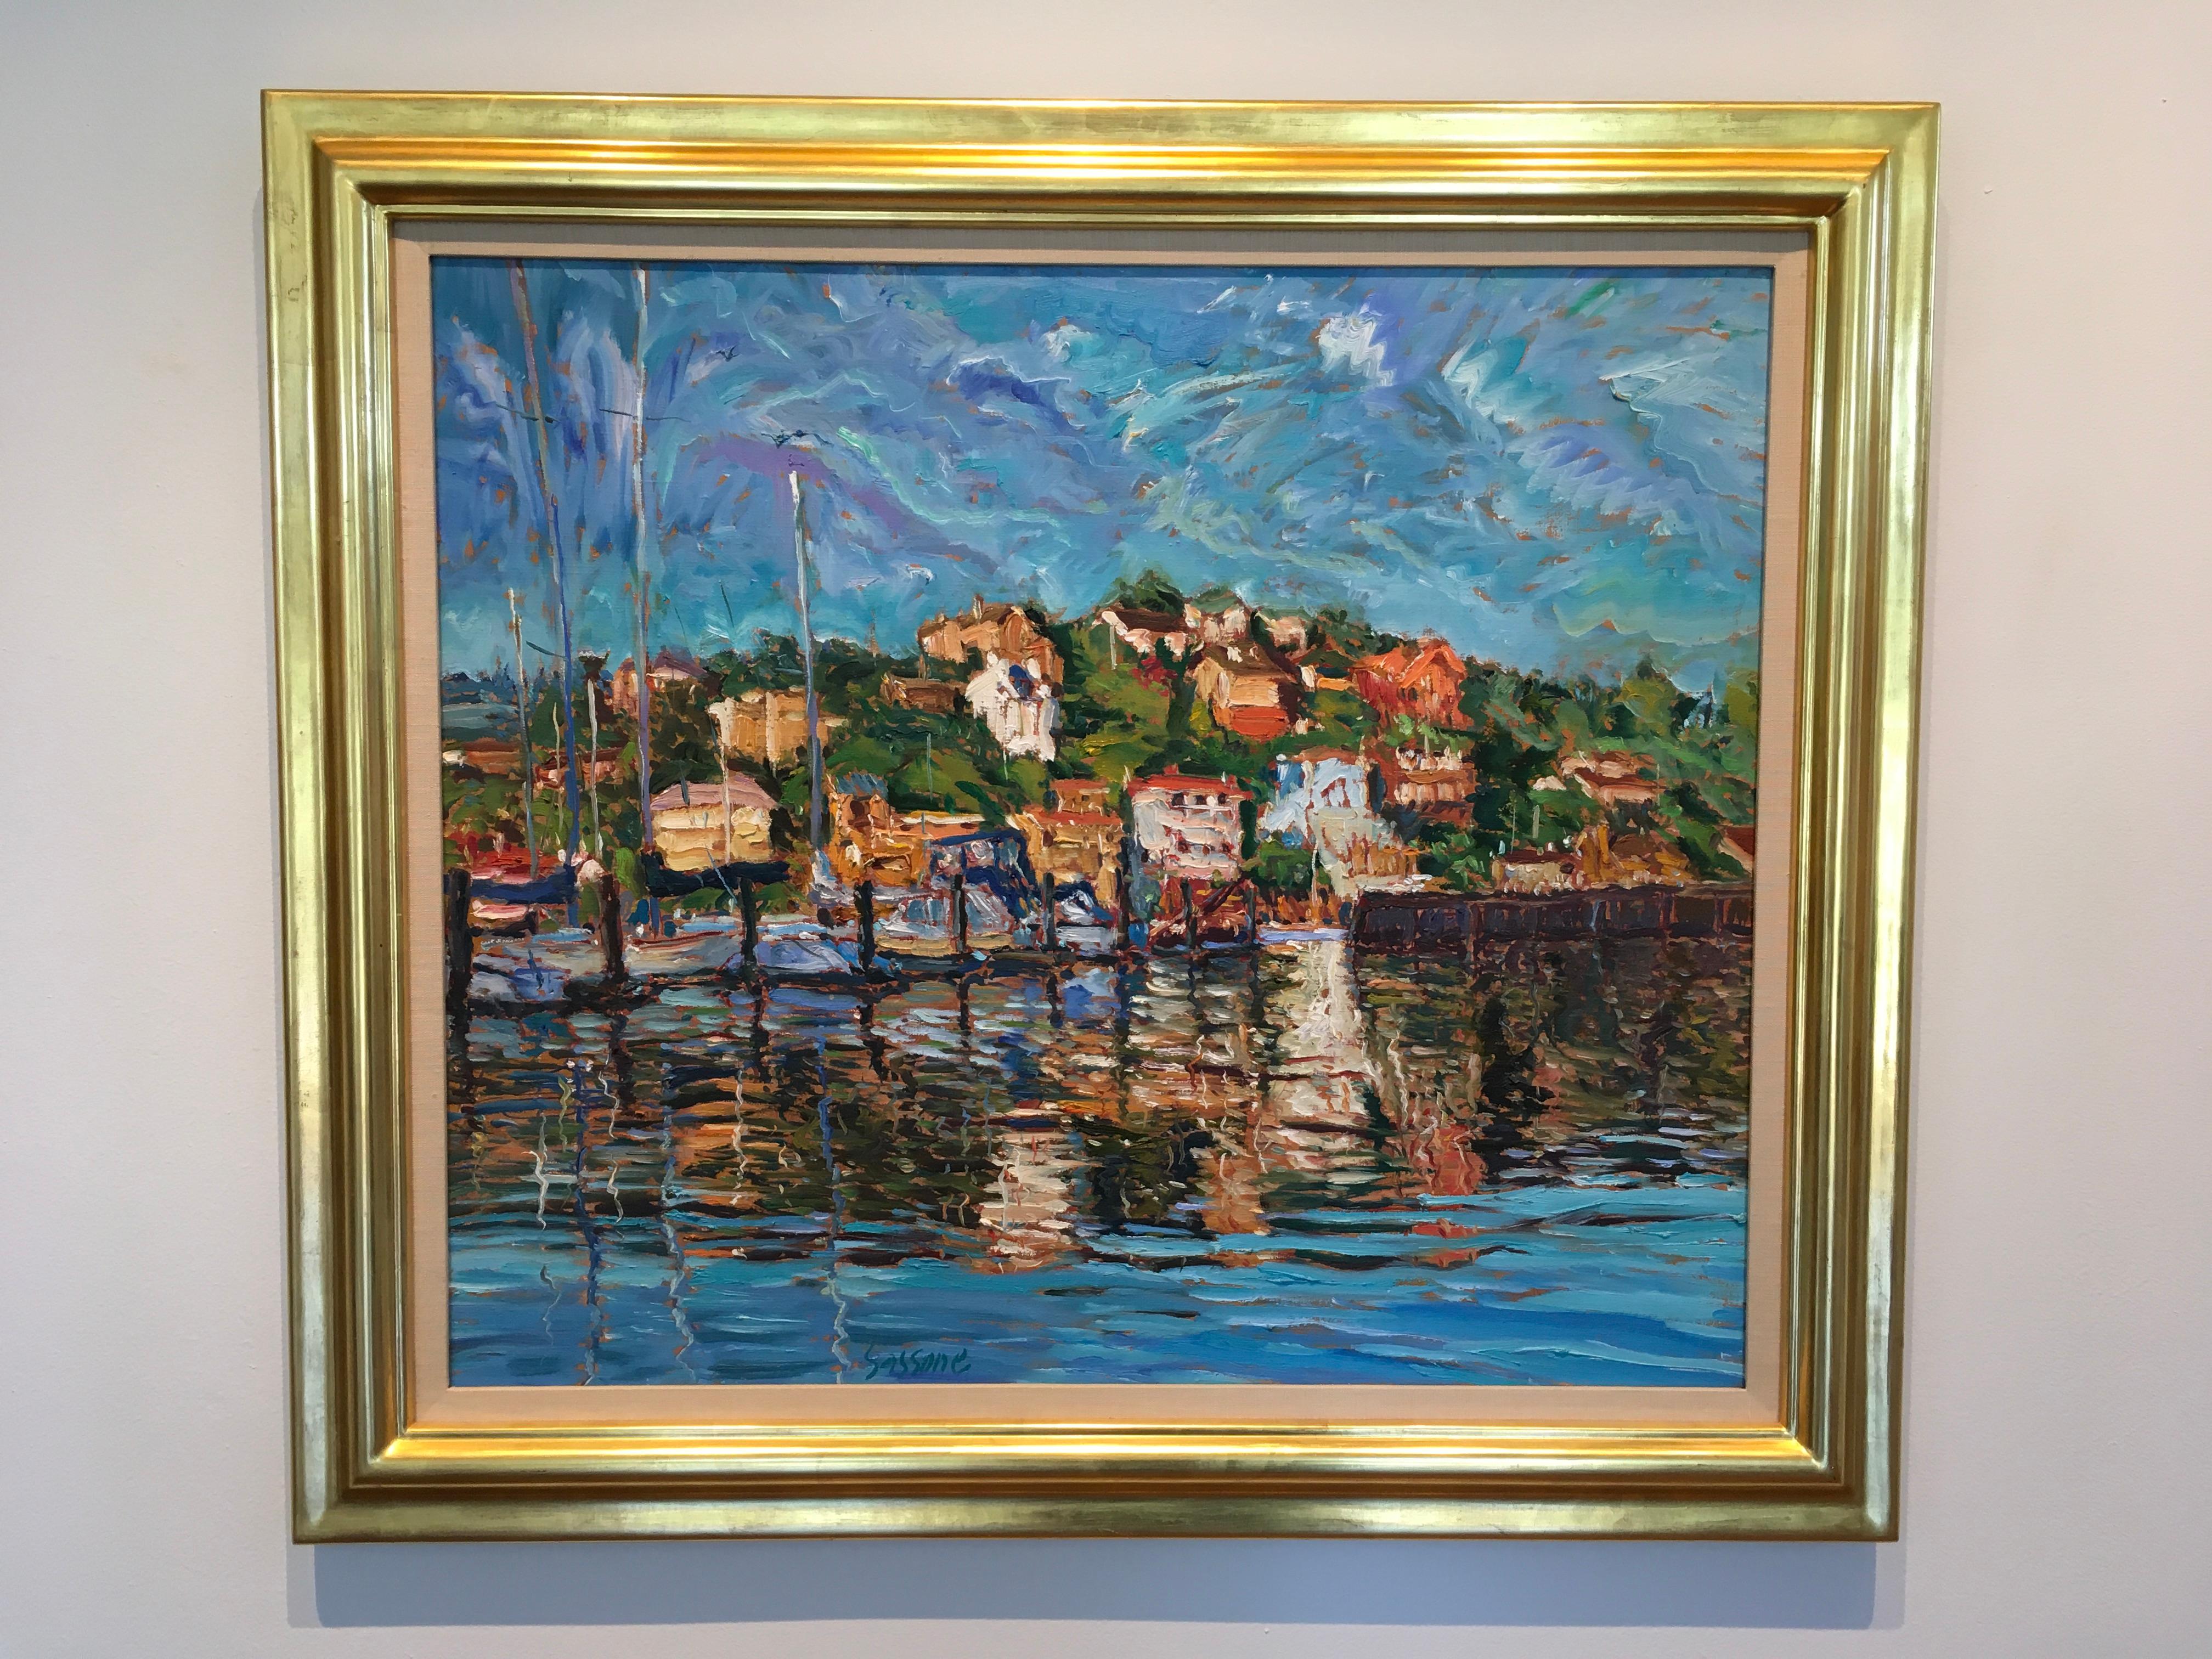 This framed oil on linen painting, 'Riflessi A Tiburon,' by Marco Sassone, an American-Italian painter, is measured at 30 x 24 inches in a horizontal format. Sassone paints an Expressionist view of a coastal, village scene. The striking blue water